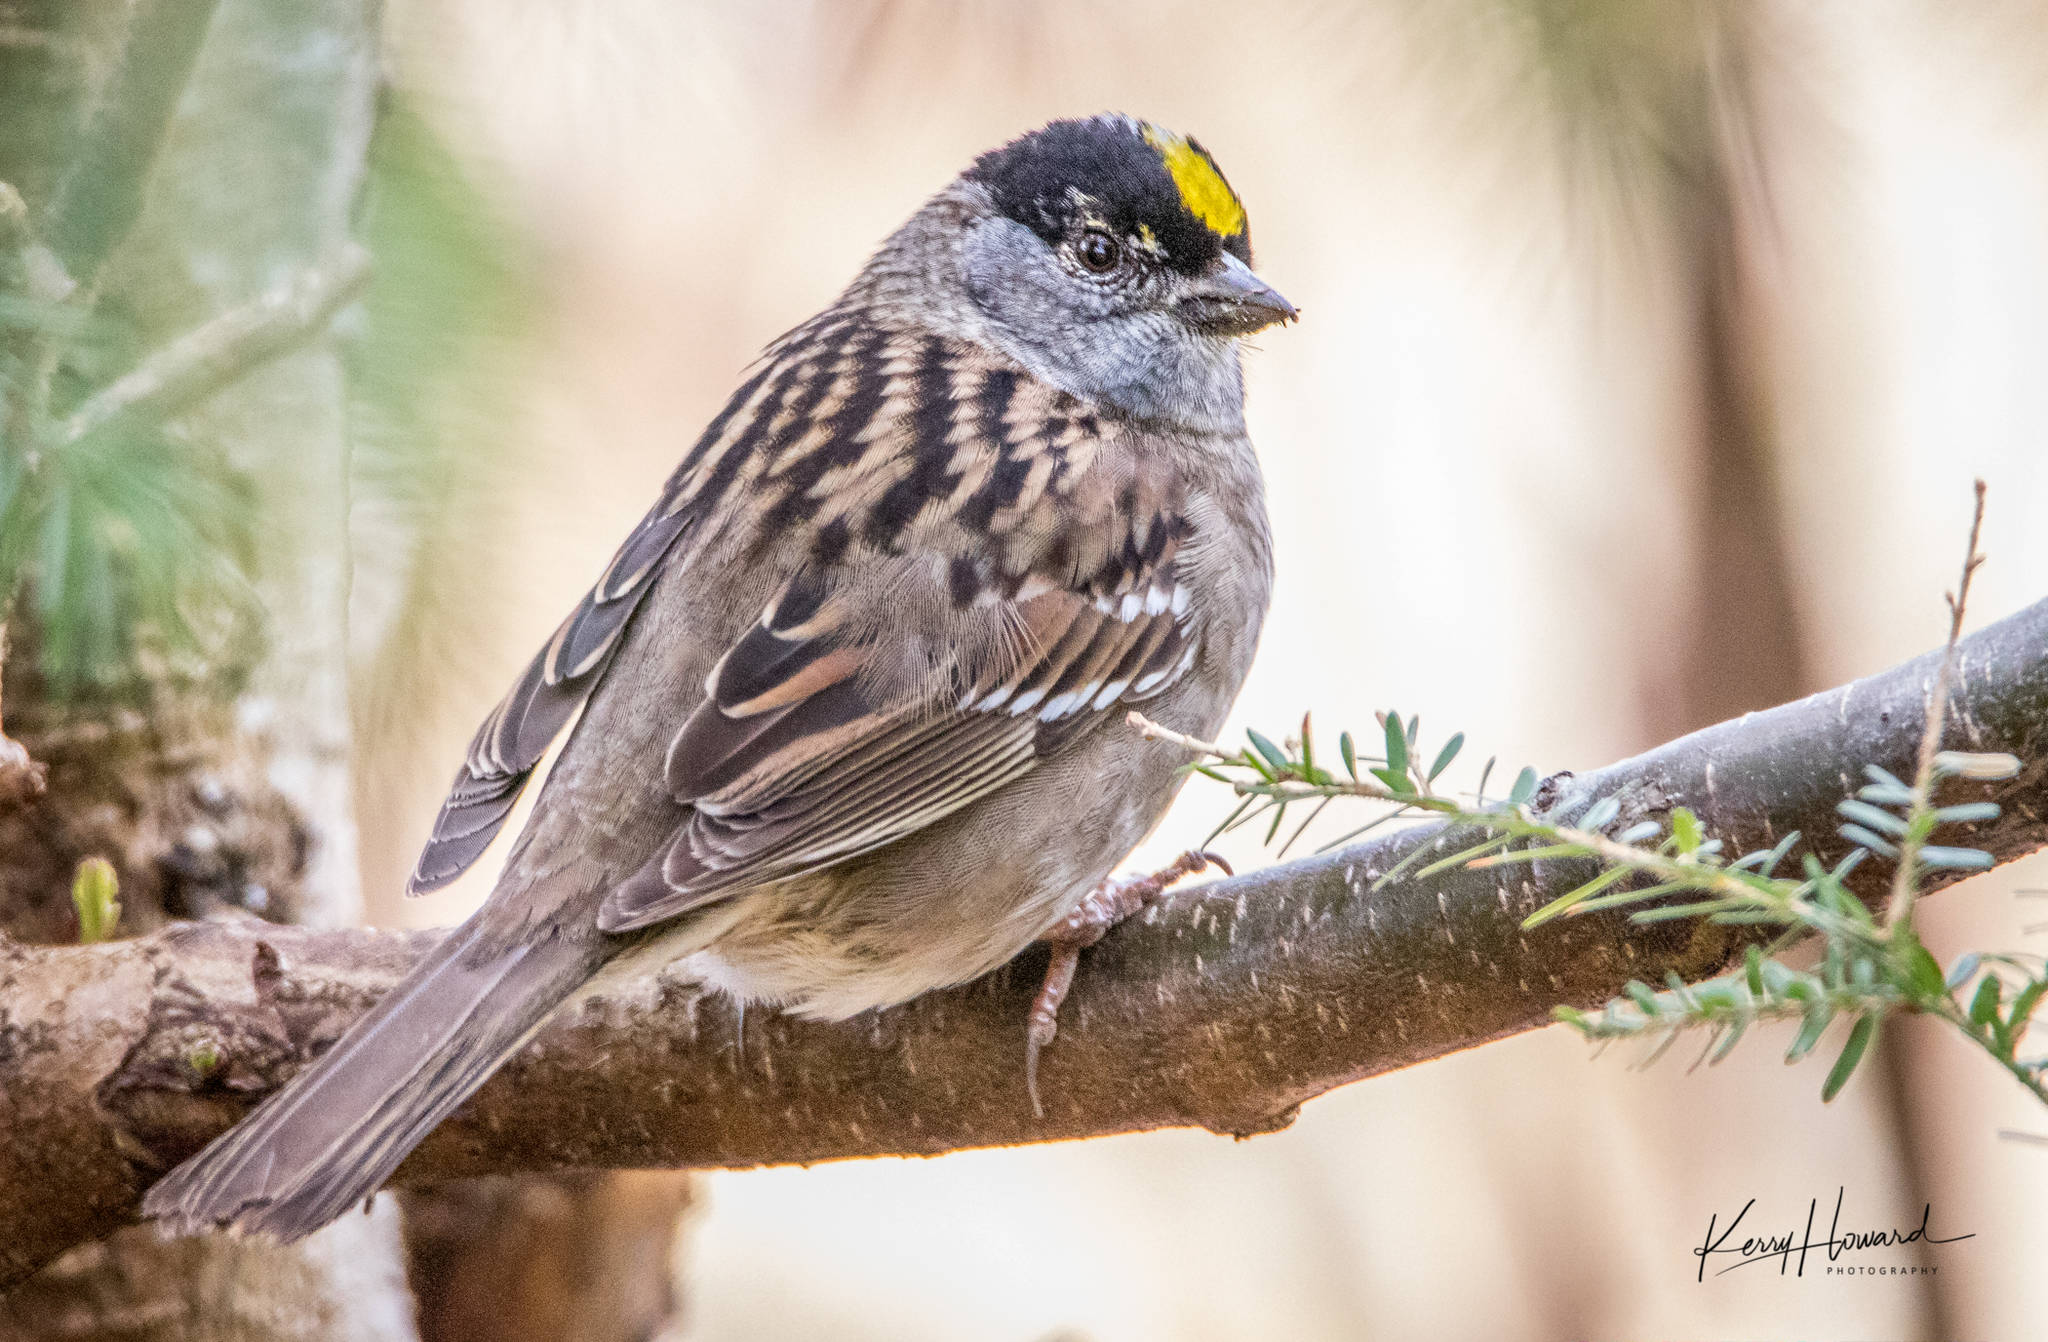 A golden-crowned sparrow. (Photo by Kerry Howard)